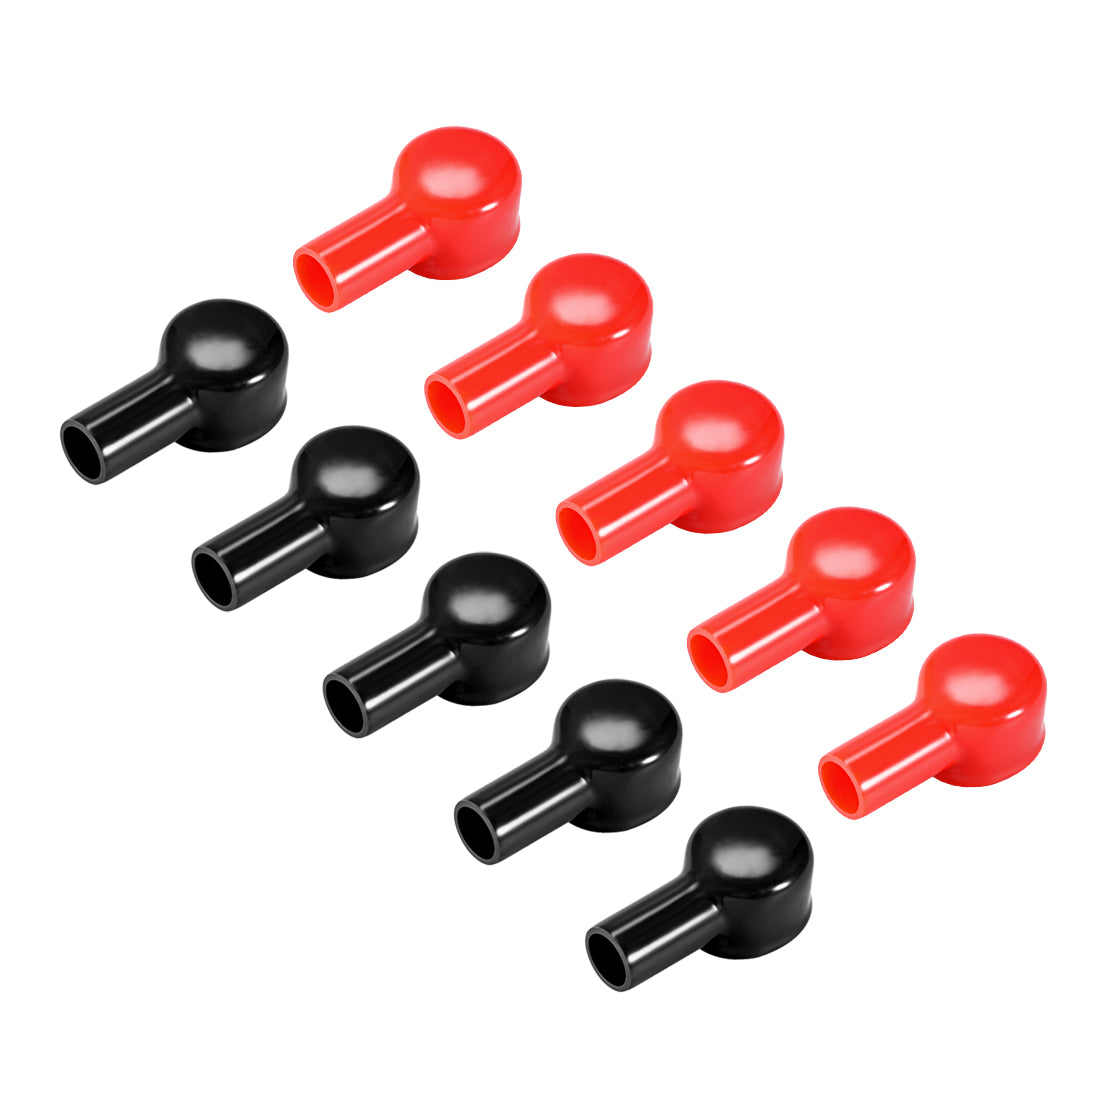 uxcell Uxcell Battery Terminal Insulating Rubber Protector Covers for 24mm Terminal 12mm Cable Red Black 5 Pairs